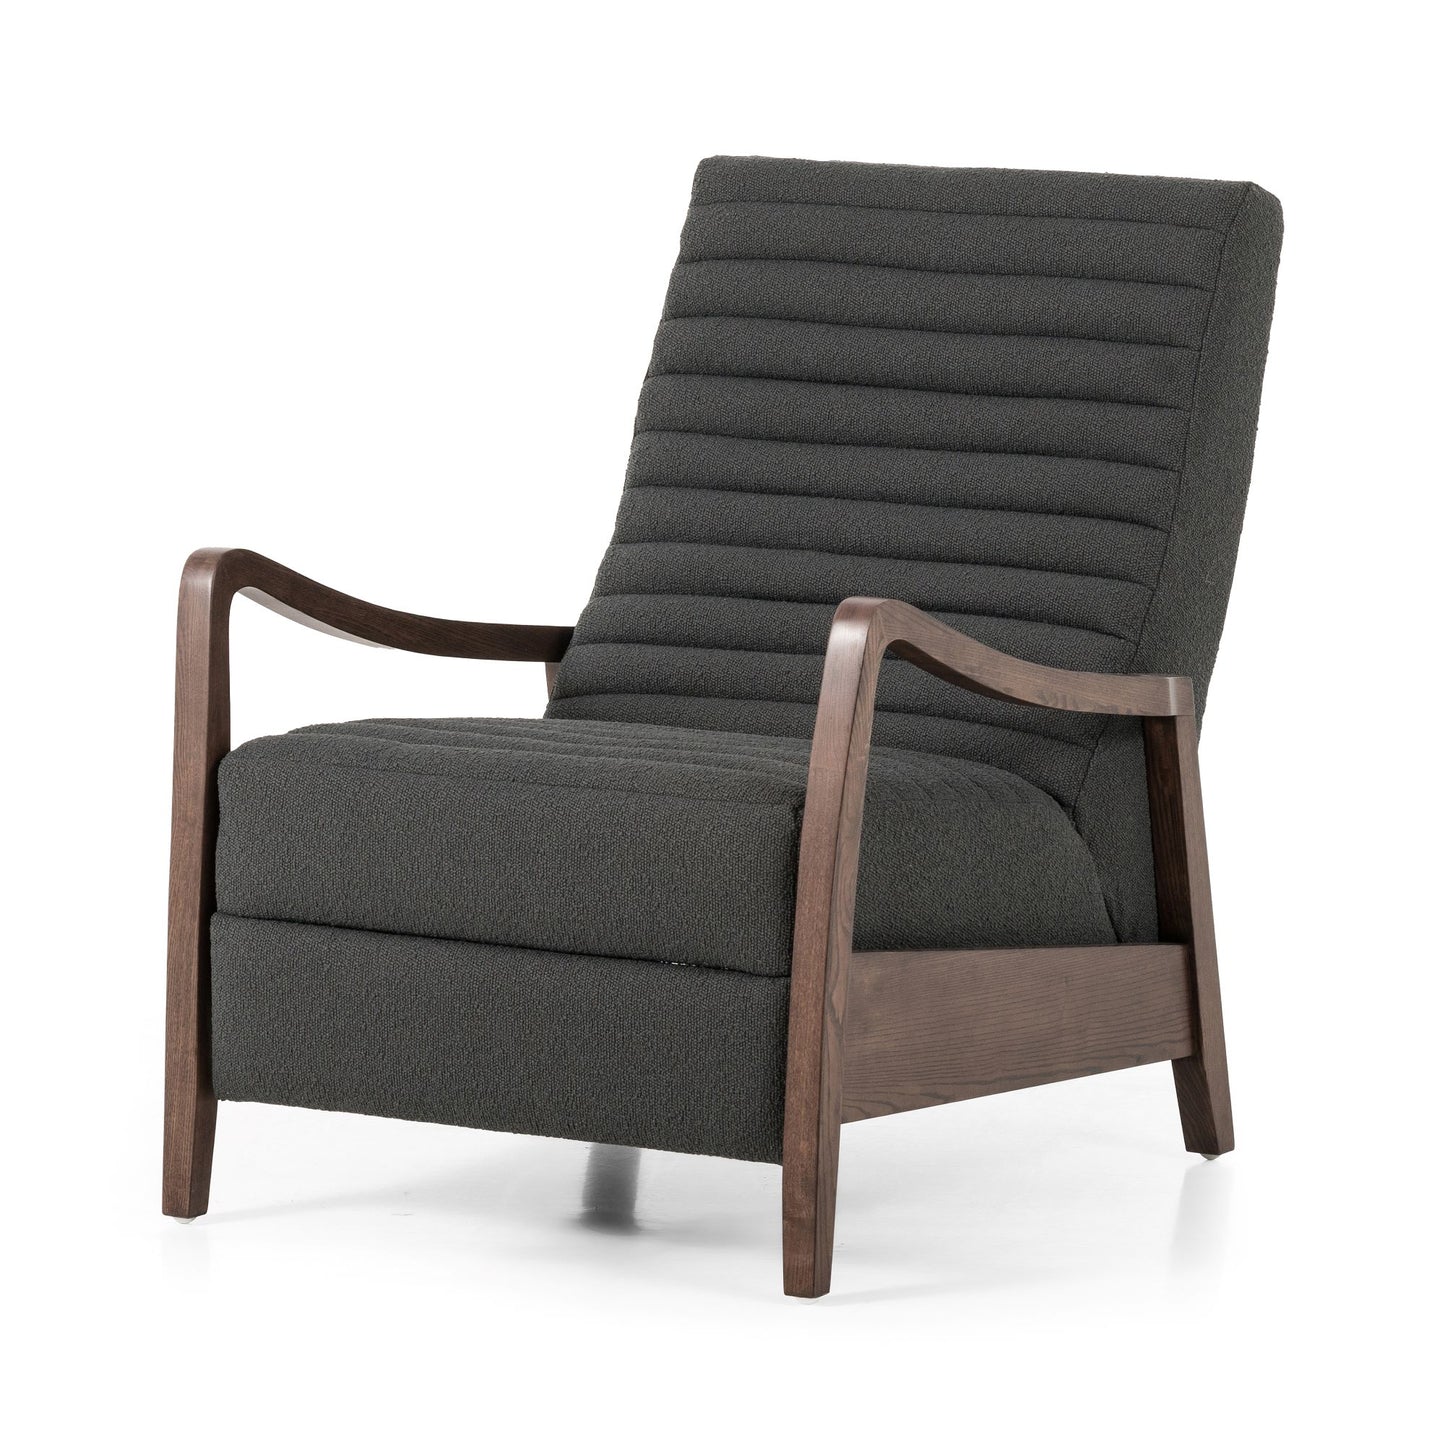 Chance Recliner Fiqa Boucle CharcoalArm Chairs, Recliners & Sleeper Chairs Four Hands  Fiqa Boucle Charcoal   Four Hands, Mid Century Modern Furniture, Old Bones Furniture Company, Old Bones Co, Modern Mid Century, Designer Furniture, https://www.oldbonesco.com/